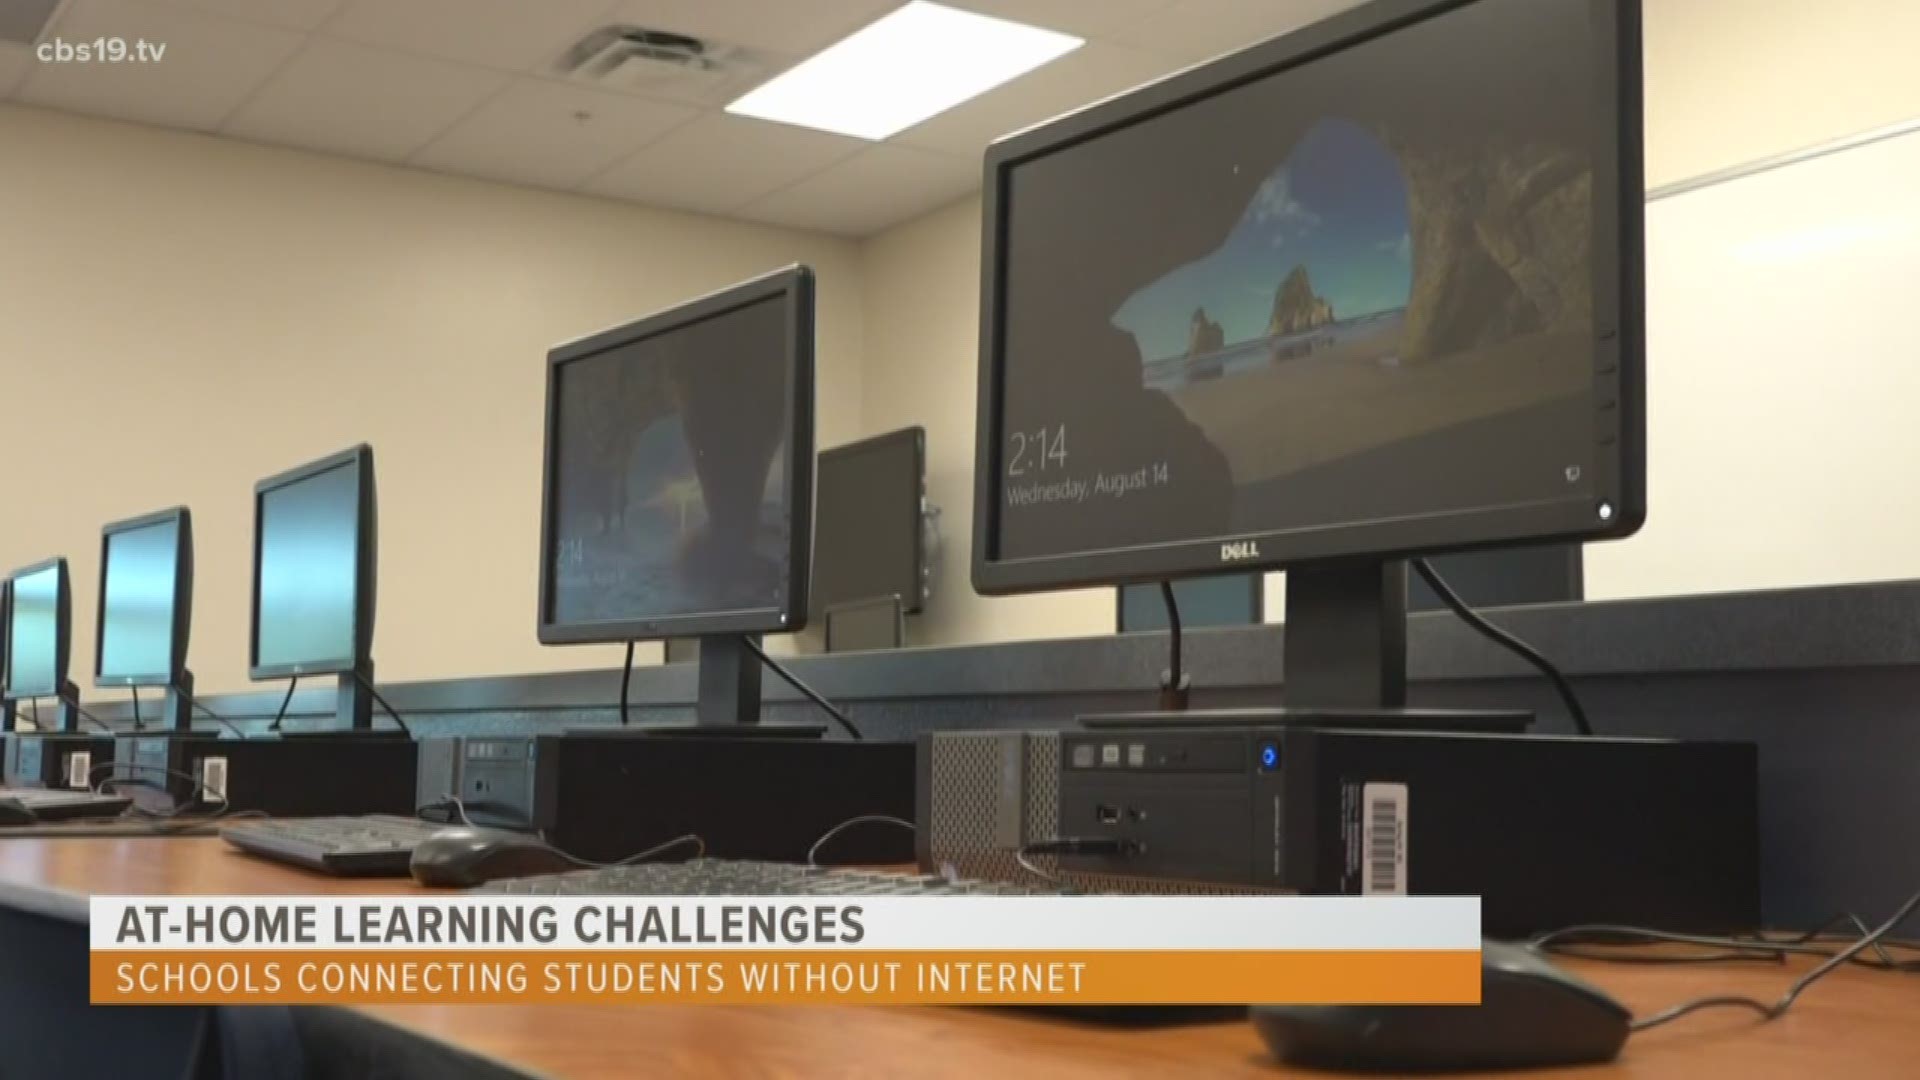 Districts hope to fix significant challenges, which include nutritional meals for students and access to the internet.